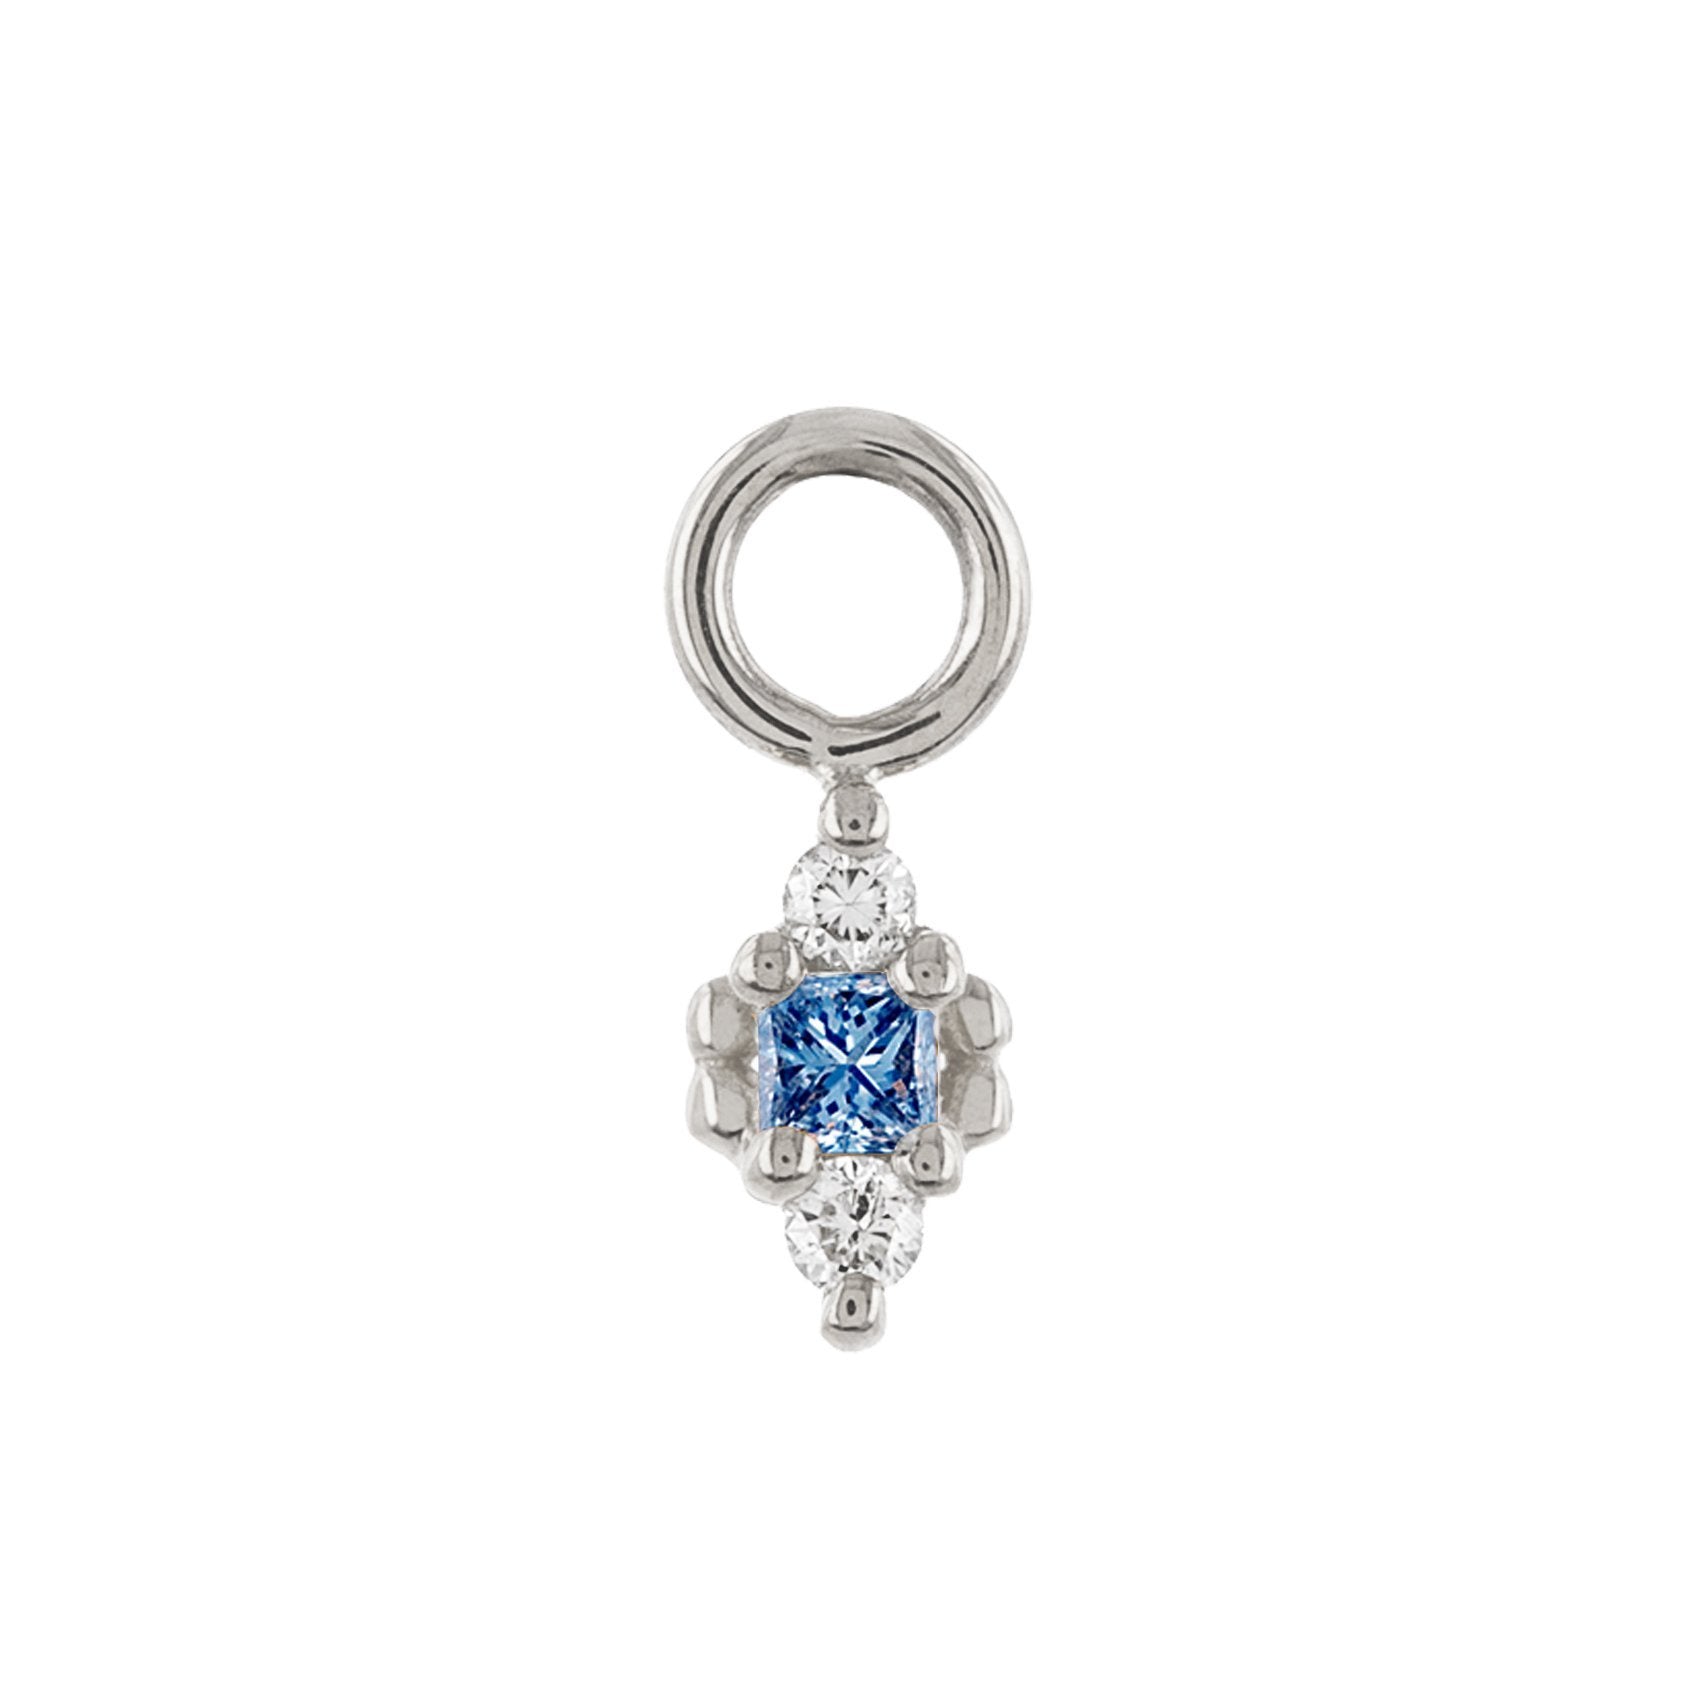 Metier by tomfoolery 9ct White Gold Dala 3 Plaque with White Diamonds and Blue Sapphire